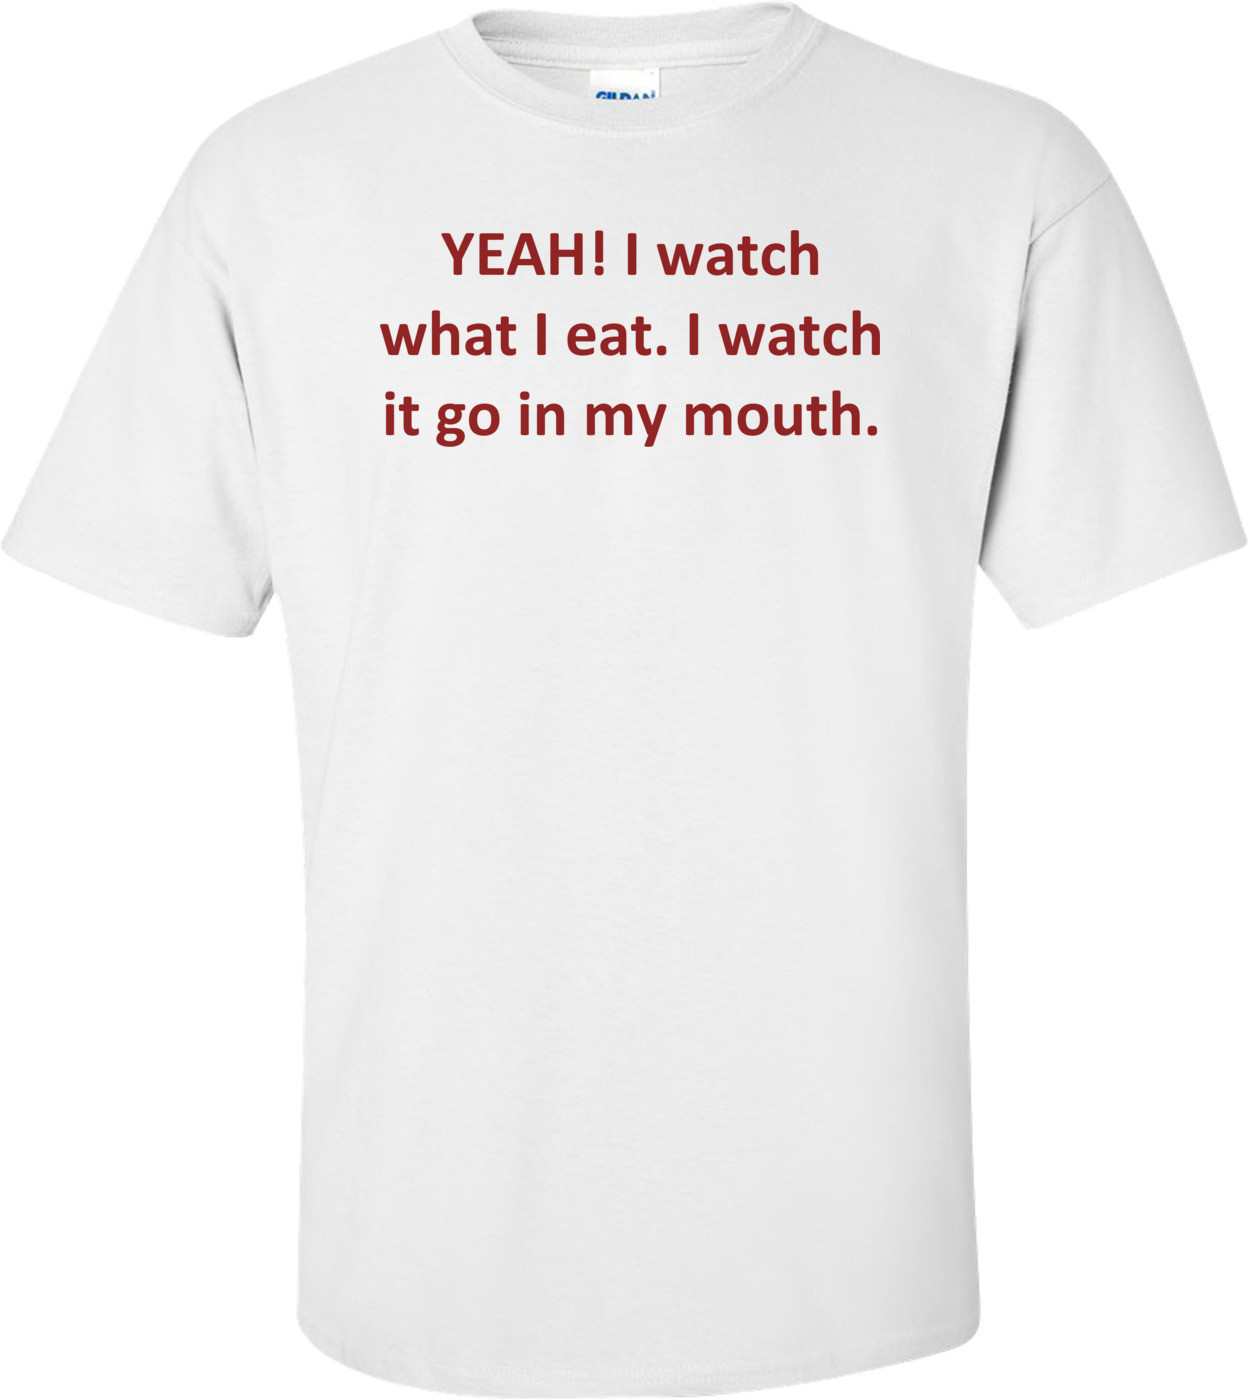 YEAH! I watch what I eat. I watch it go in my mouth.